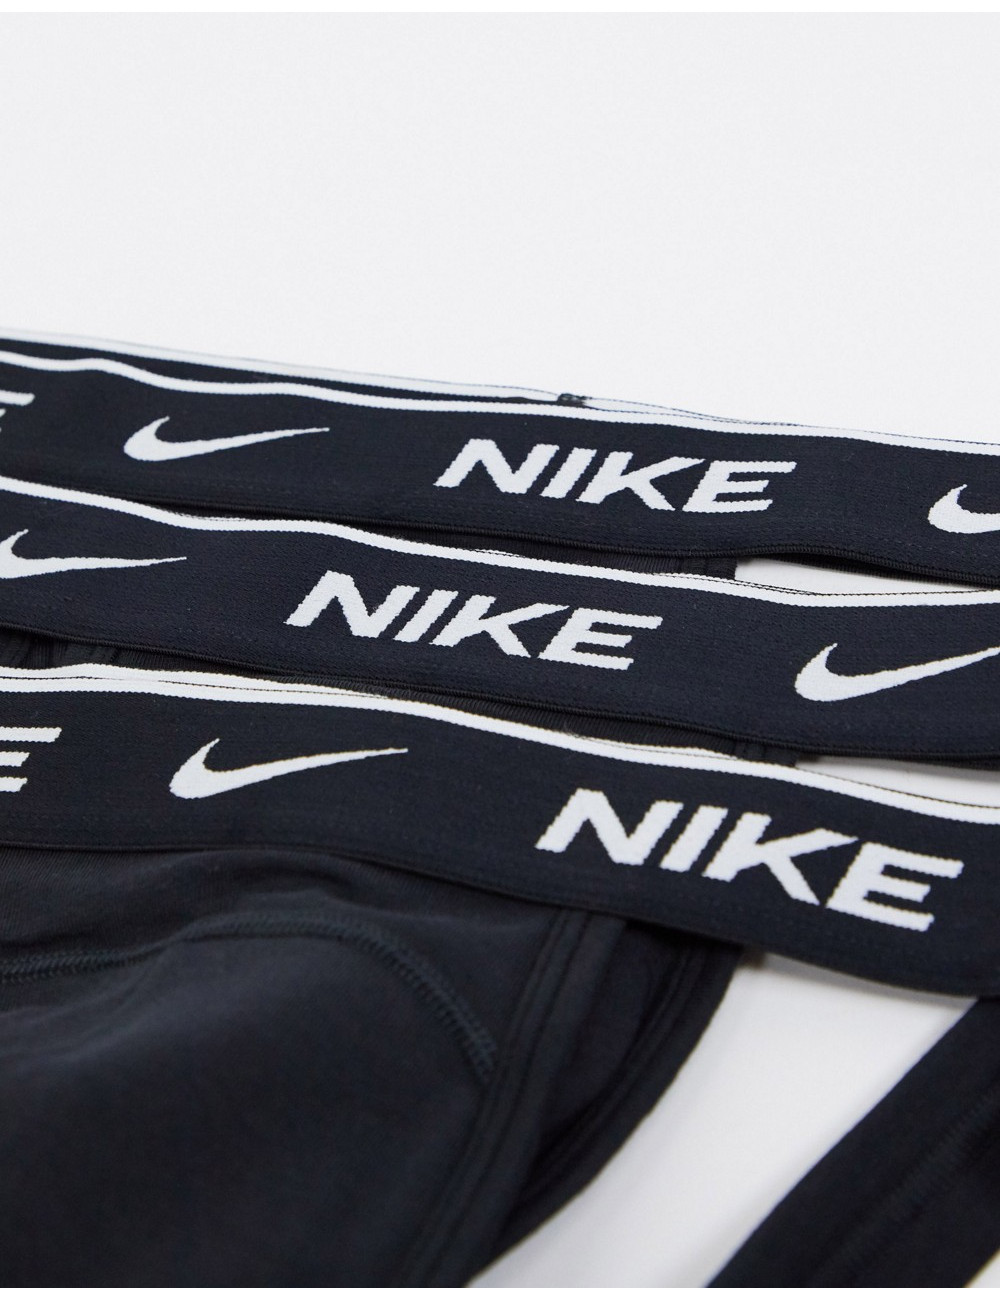 Nike 3 pack cotton stretch...